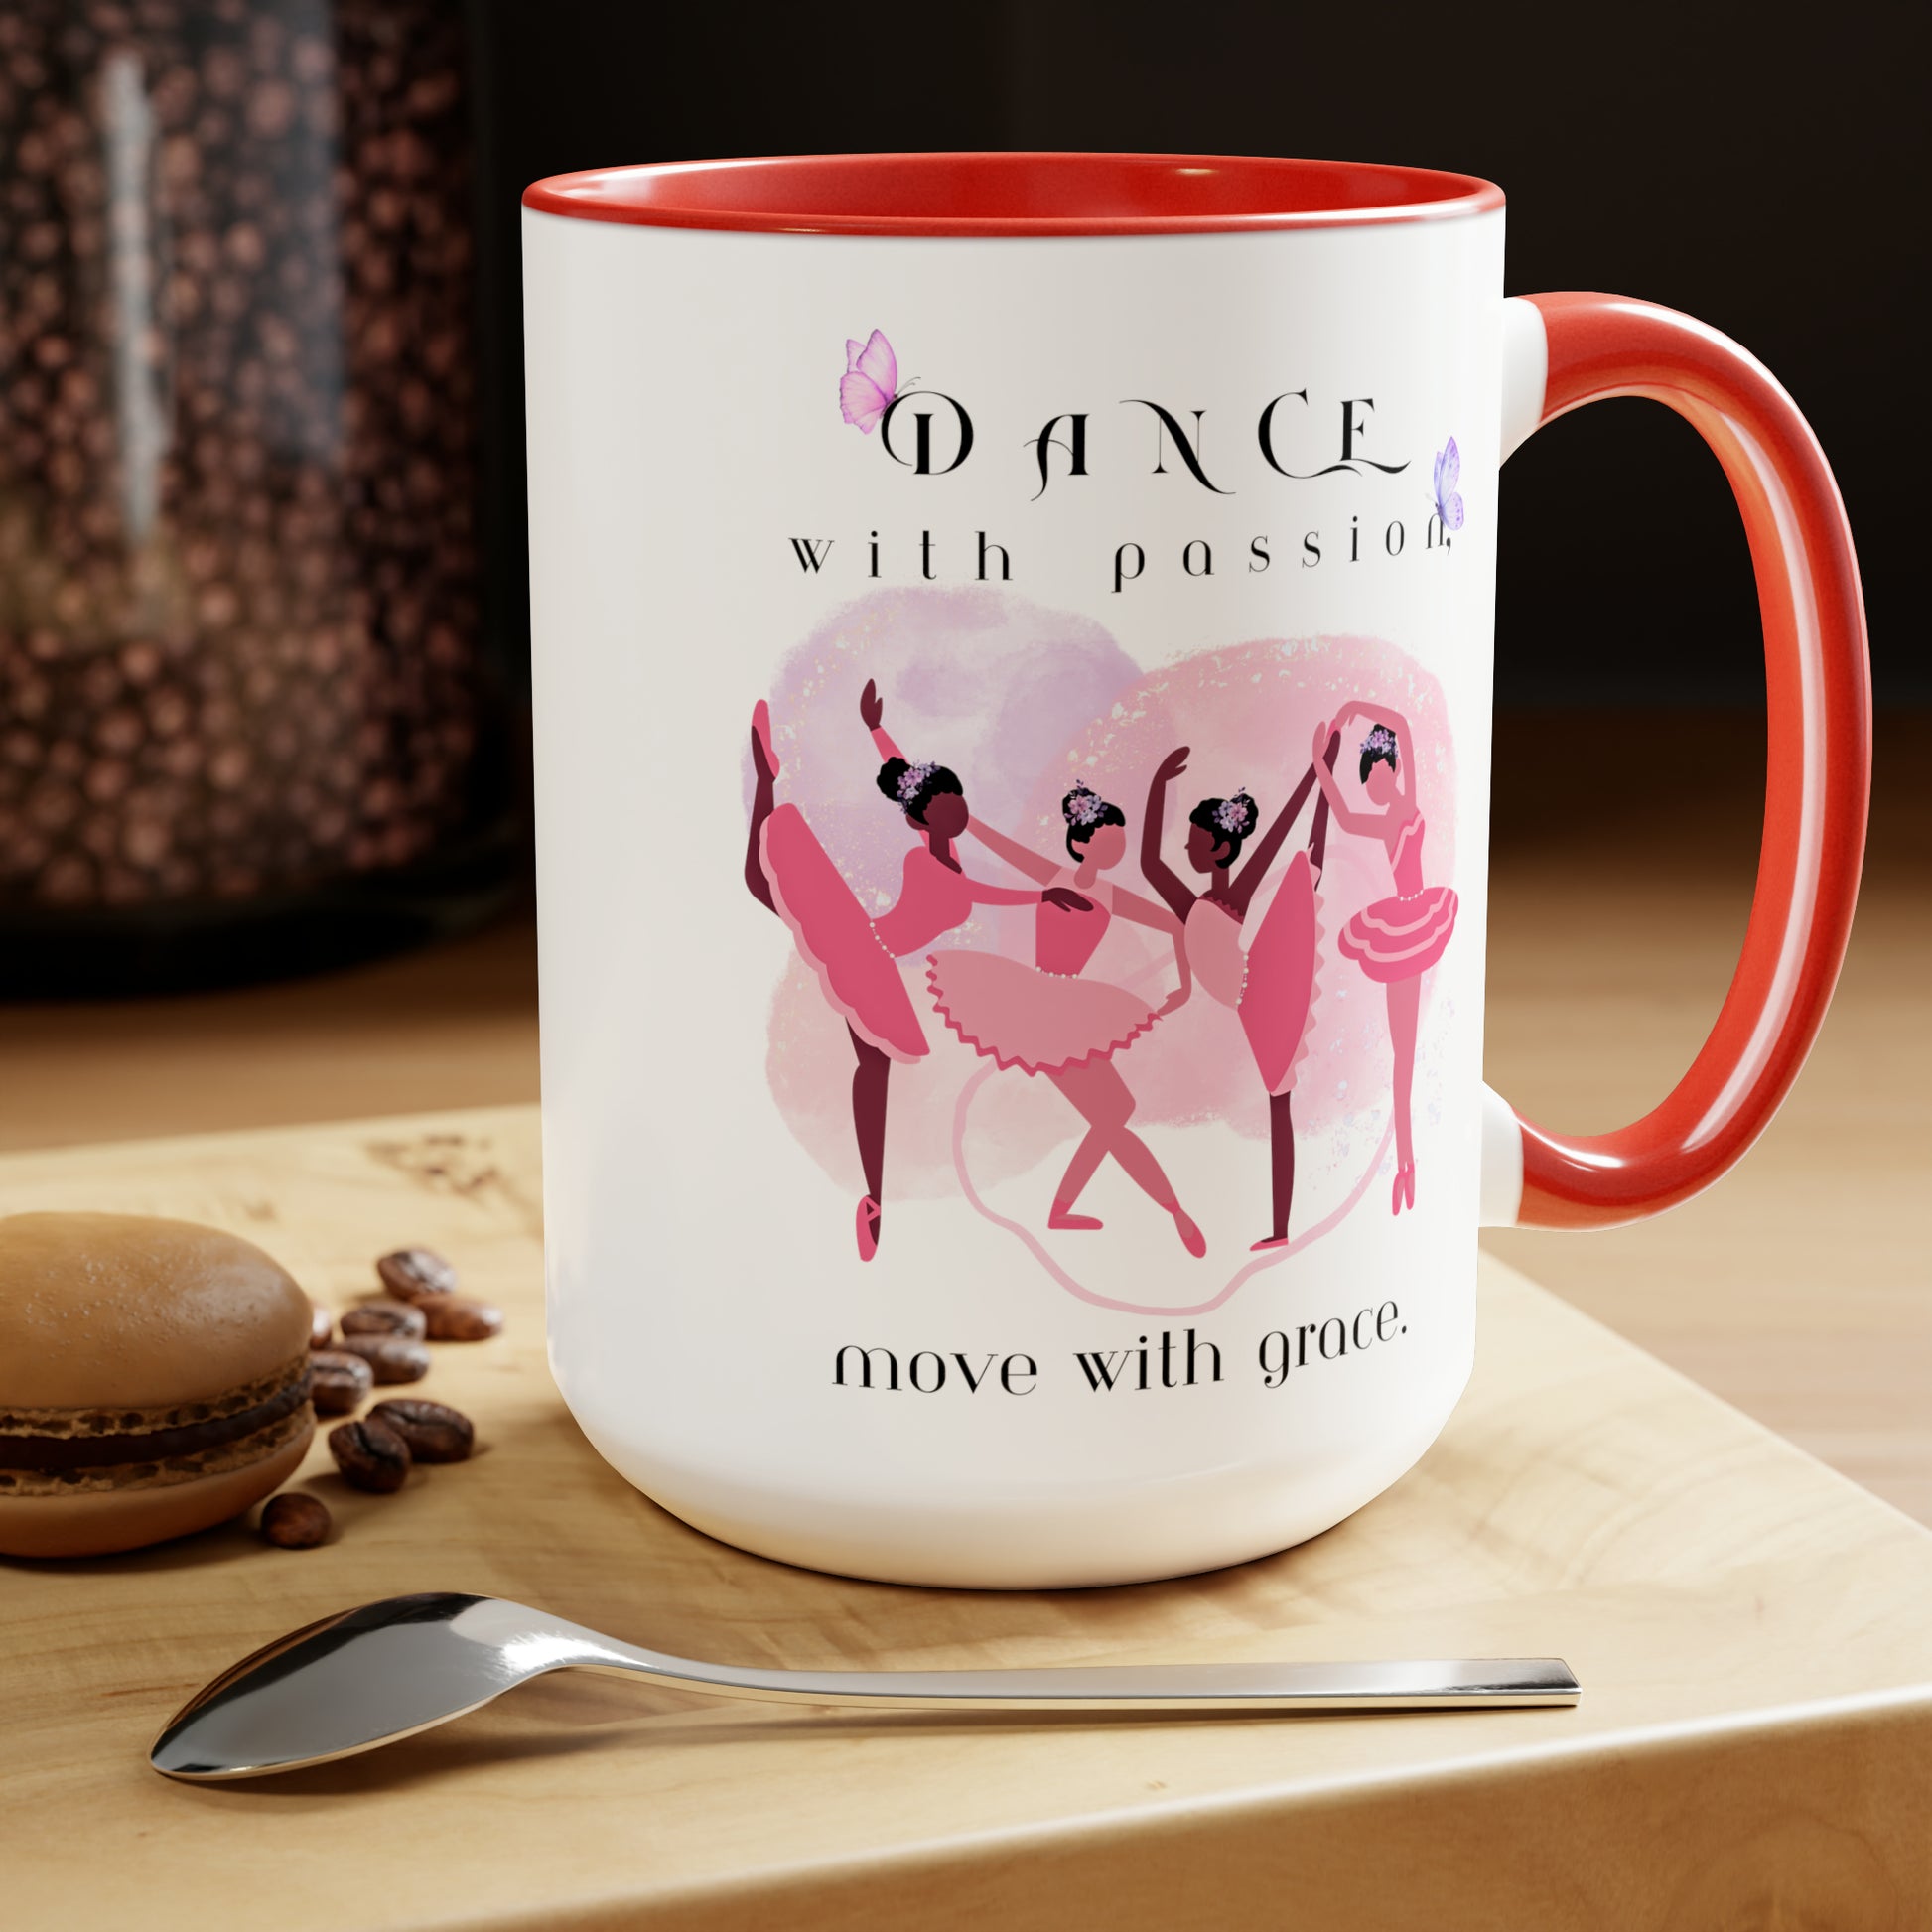 Two-Tone Coffee Mugs, 15oz - Dance with passion Ballerina - red rim